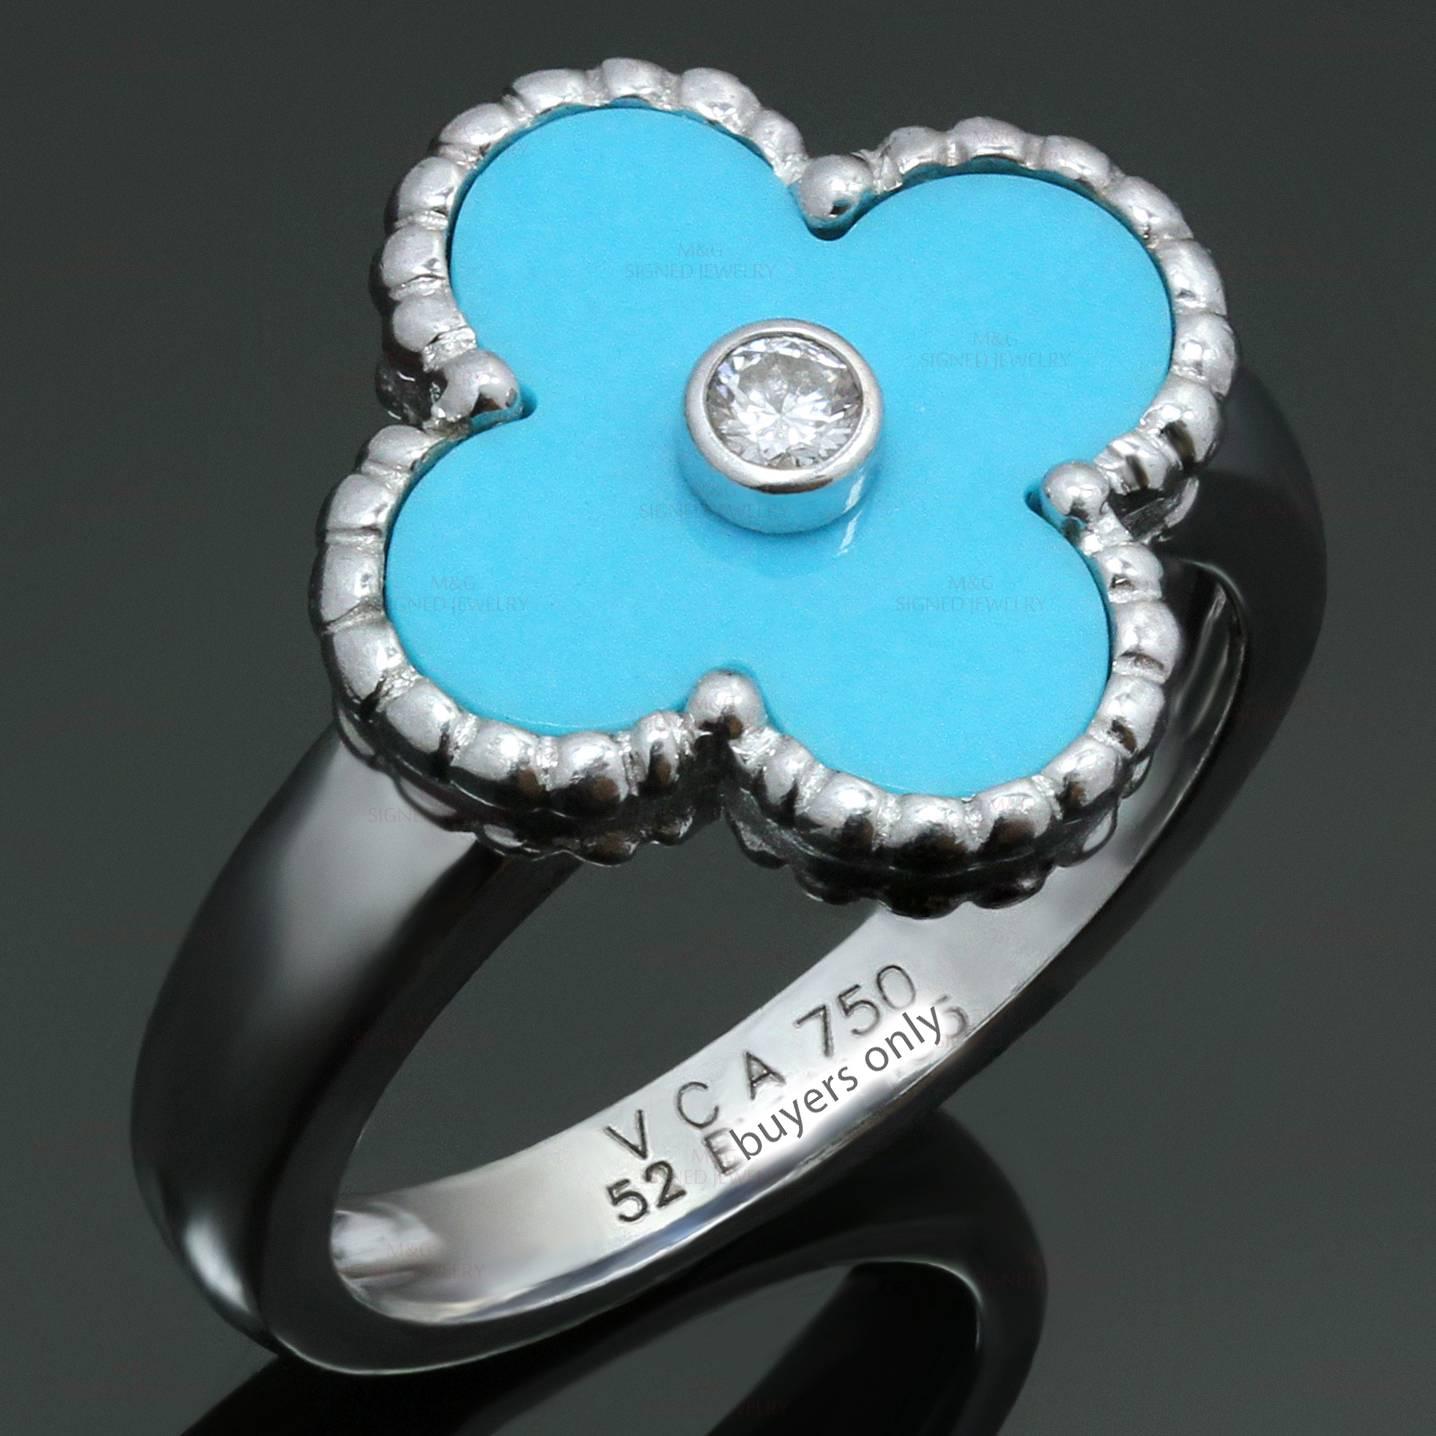 This stunning Van Cleef & Arpels ring from the Alhambra collection feature the lucky clover design crafted in 18k white gold and set with a blue turquoise accented and a bezel-set brilliant-cut round diamond of an estimated 0.06 carats. Made in